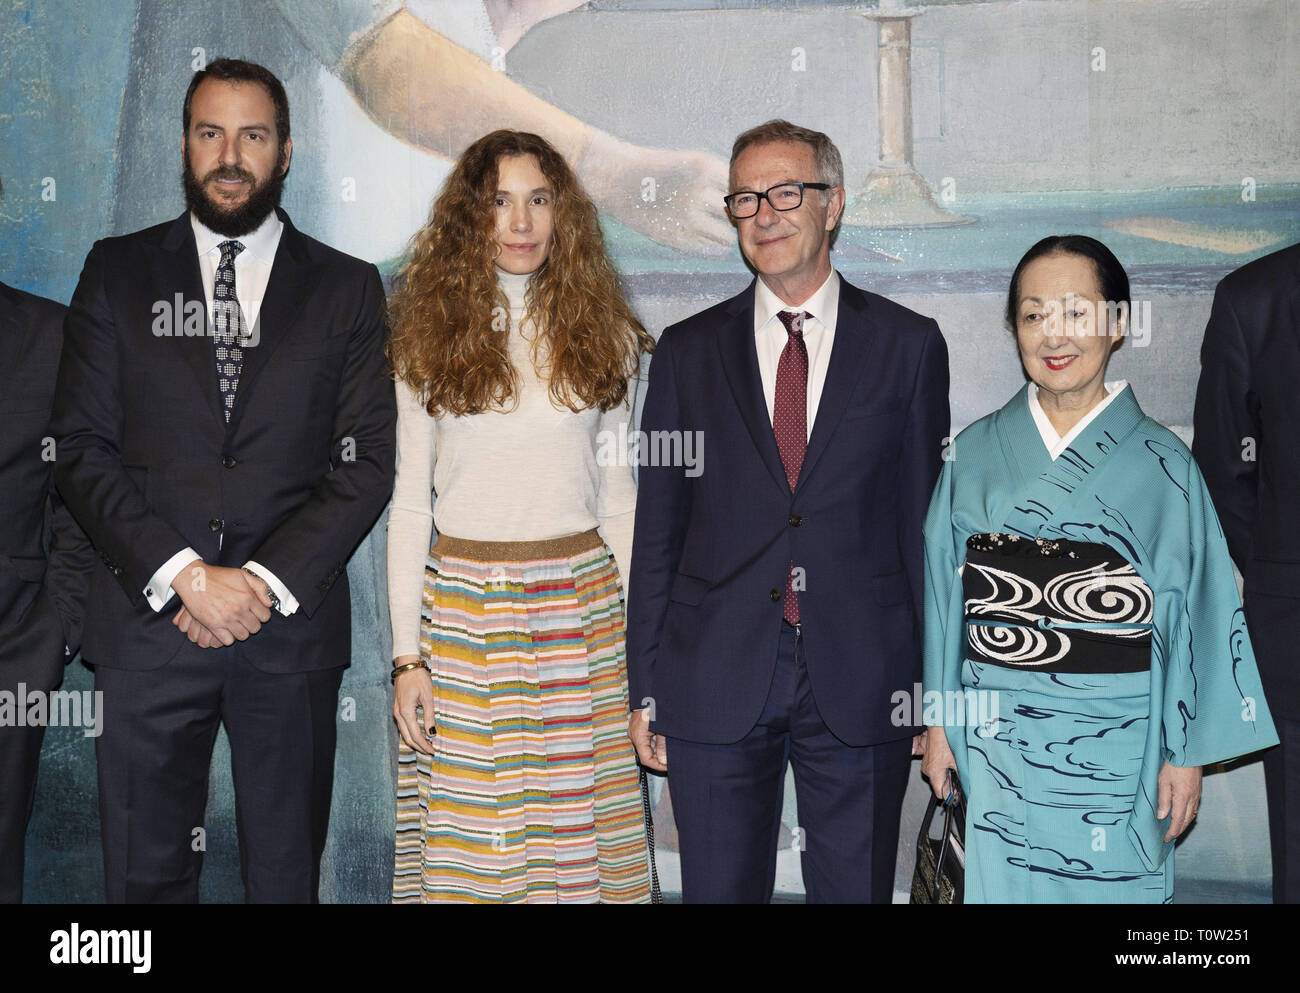 The opening of the Balthus exhibition by French artist Balthasar Klossowski de Rola at the Thyssen-Bornemisza National Museum in Madrid  Featuring: Setsuko Klossowska de Rola, Borja Thyssen-Bornemisza, Blanca Cuesta Where: Madrid, Spain When: 18 Feb 2019 Credit: Oscar Gonzalez/WENN.com Stock Photo